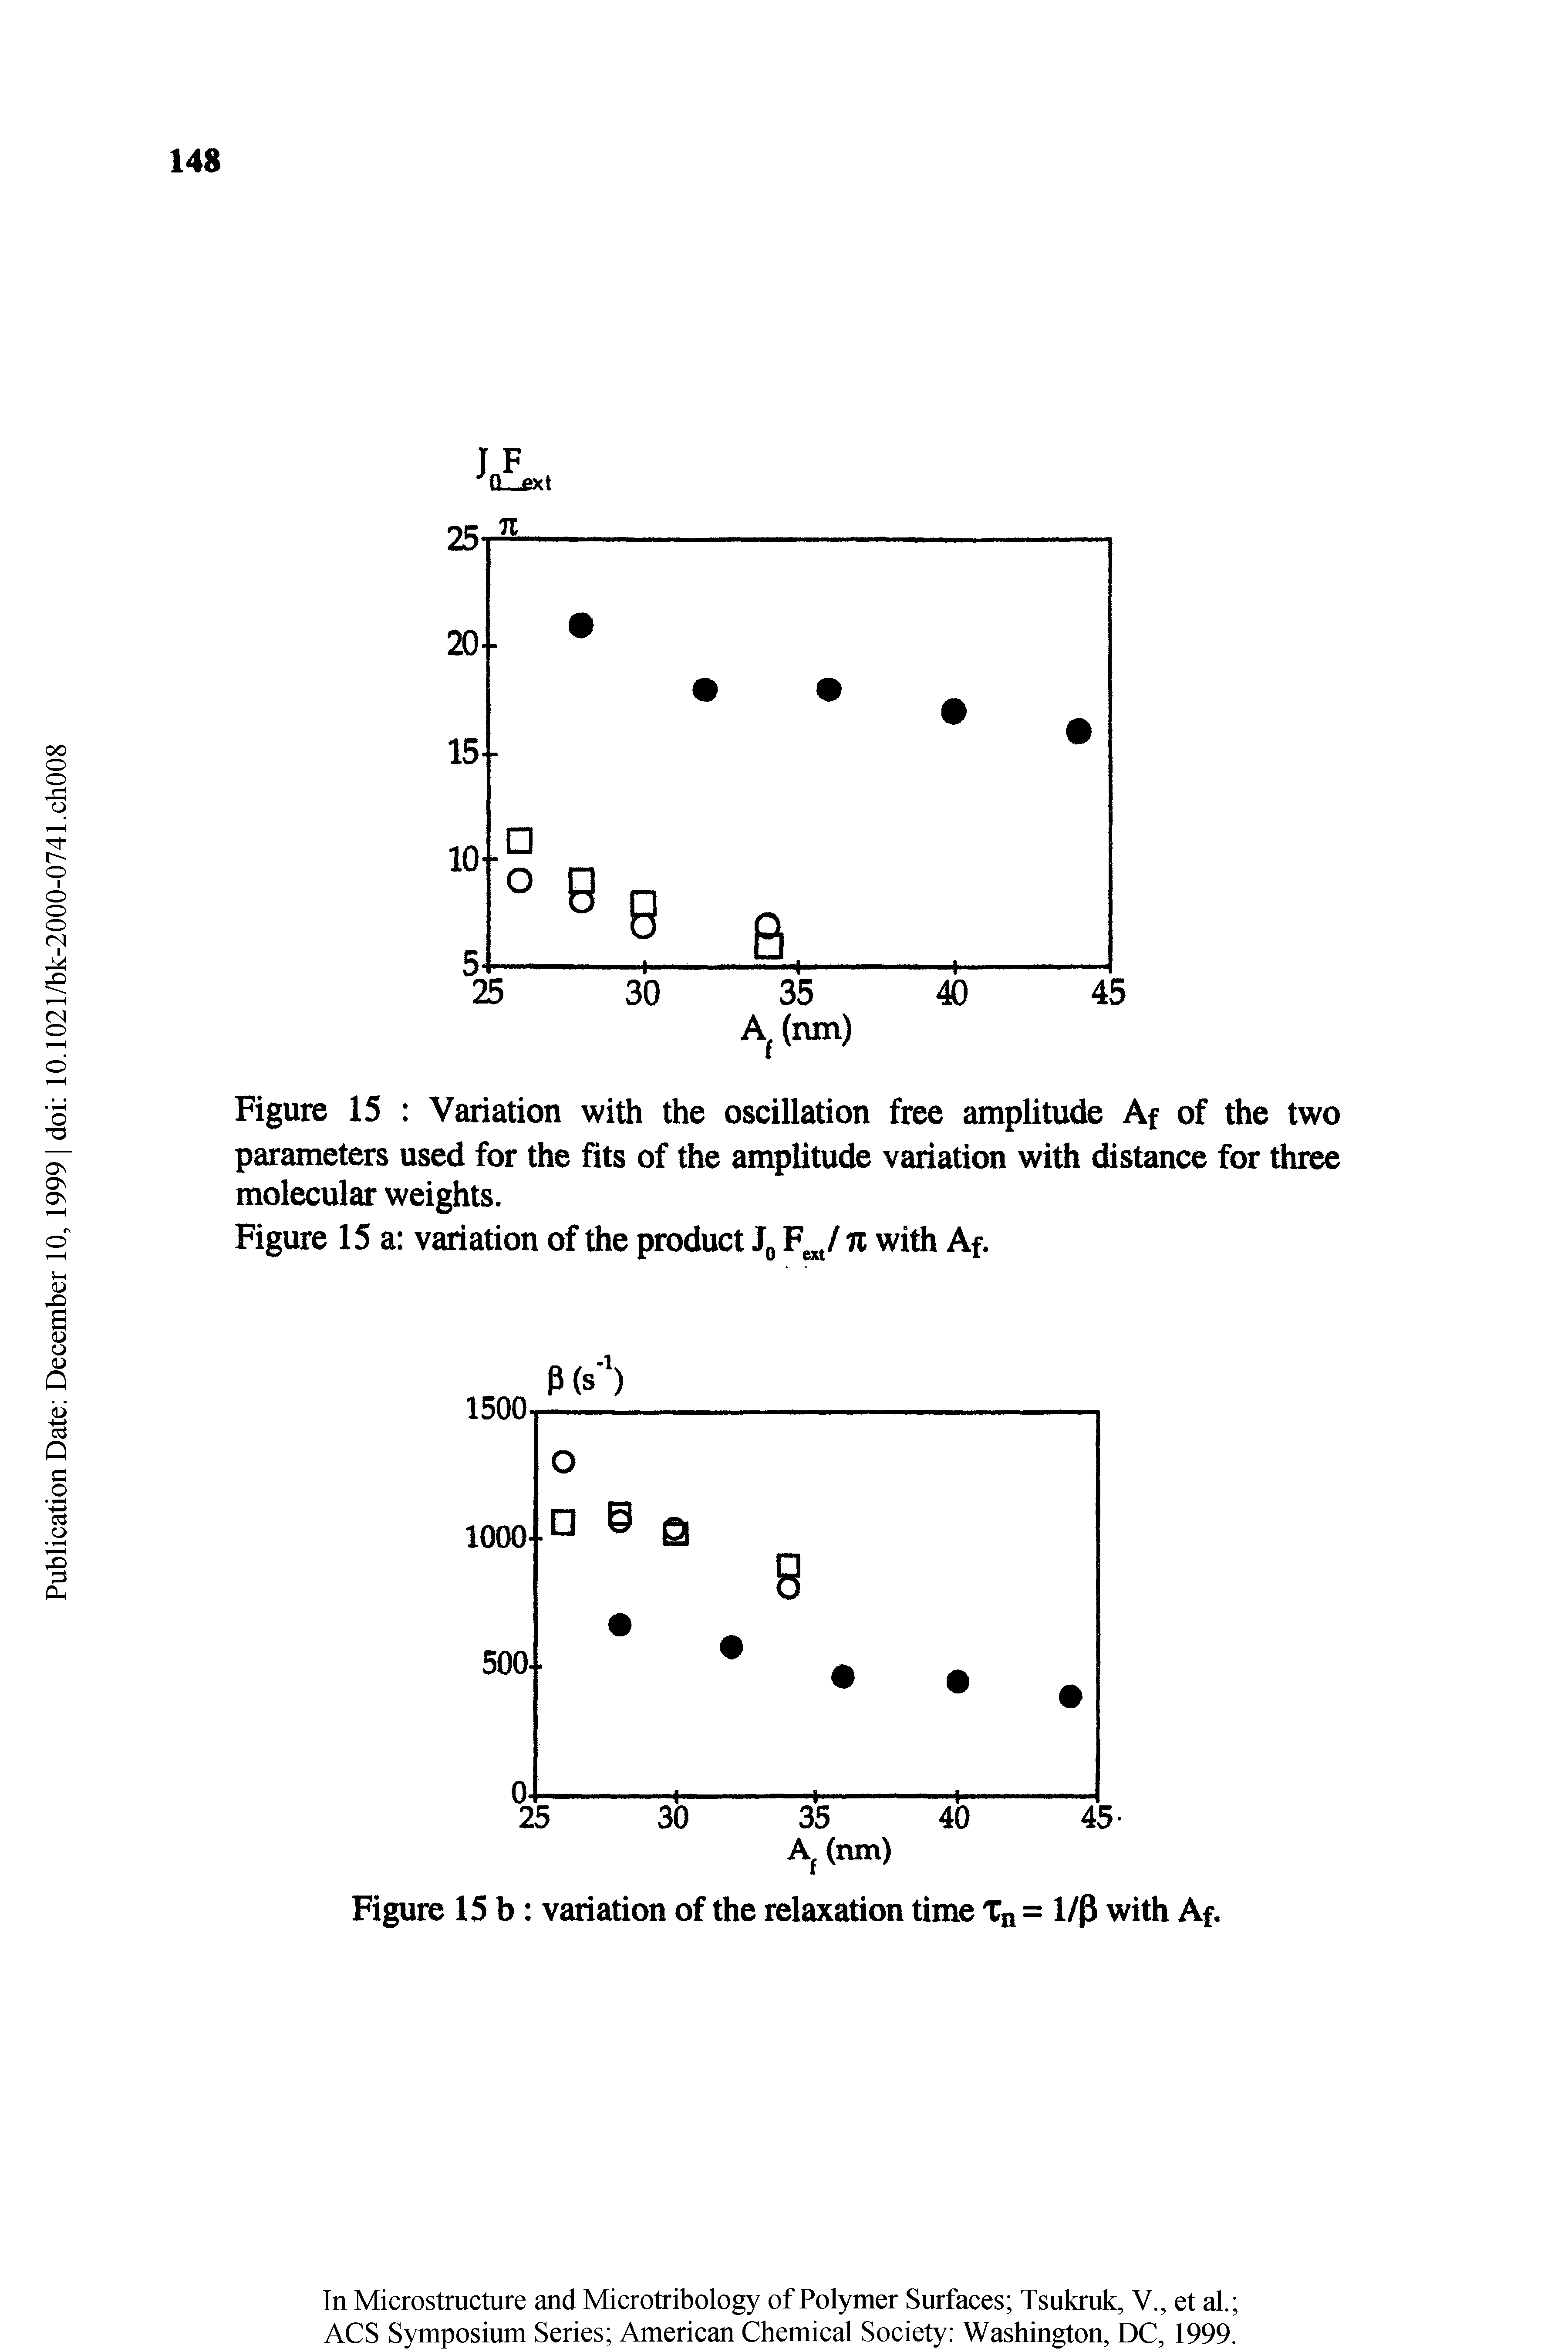 Figure 15 Variation with the oscillation free amplitude Af of the two parameters used for the fits of the amplitude variation widi distance for three molecular weights.